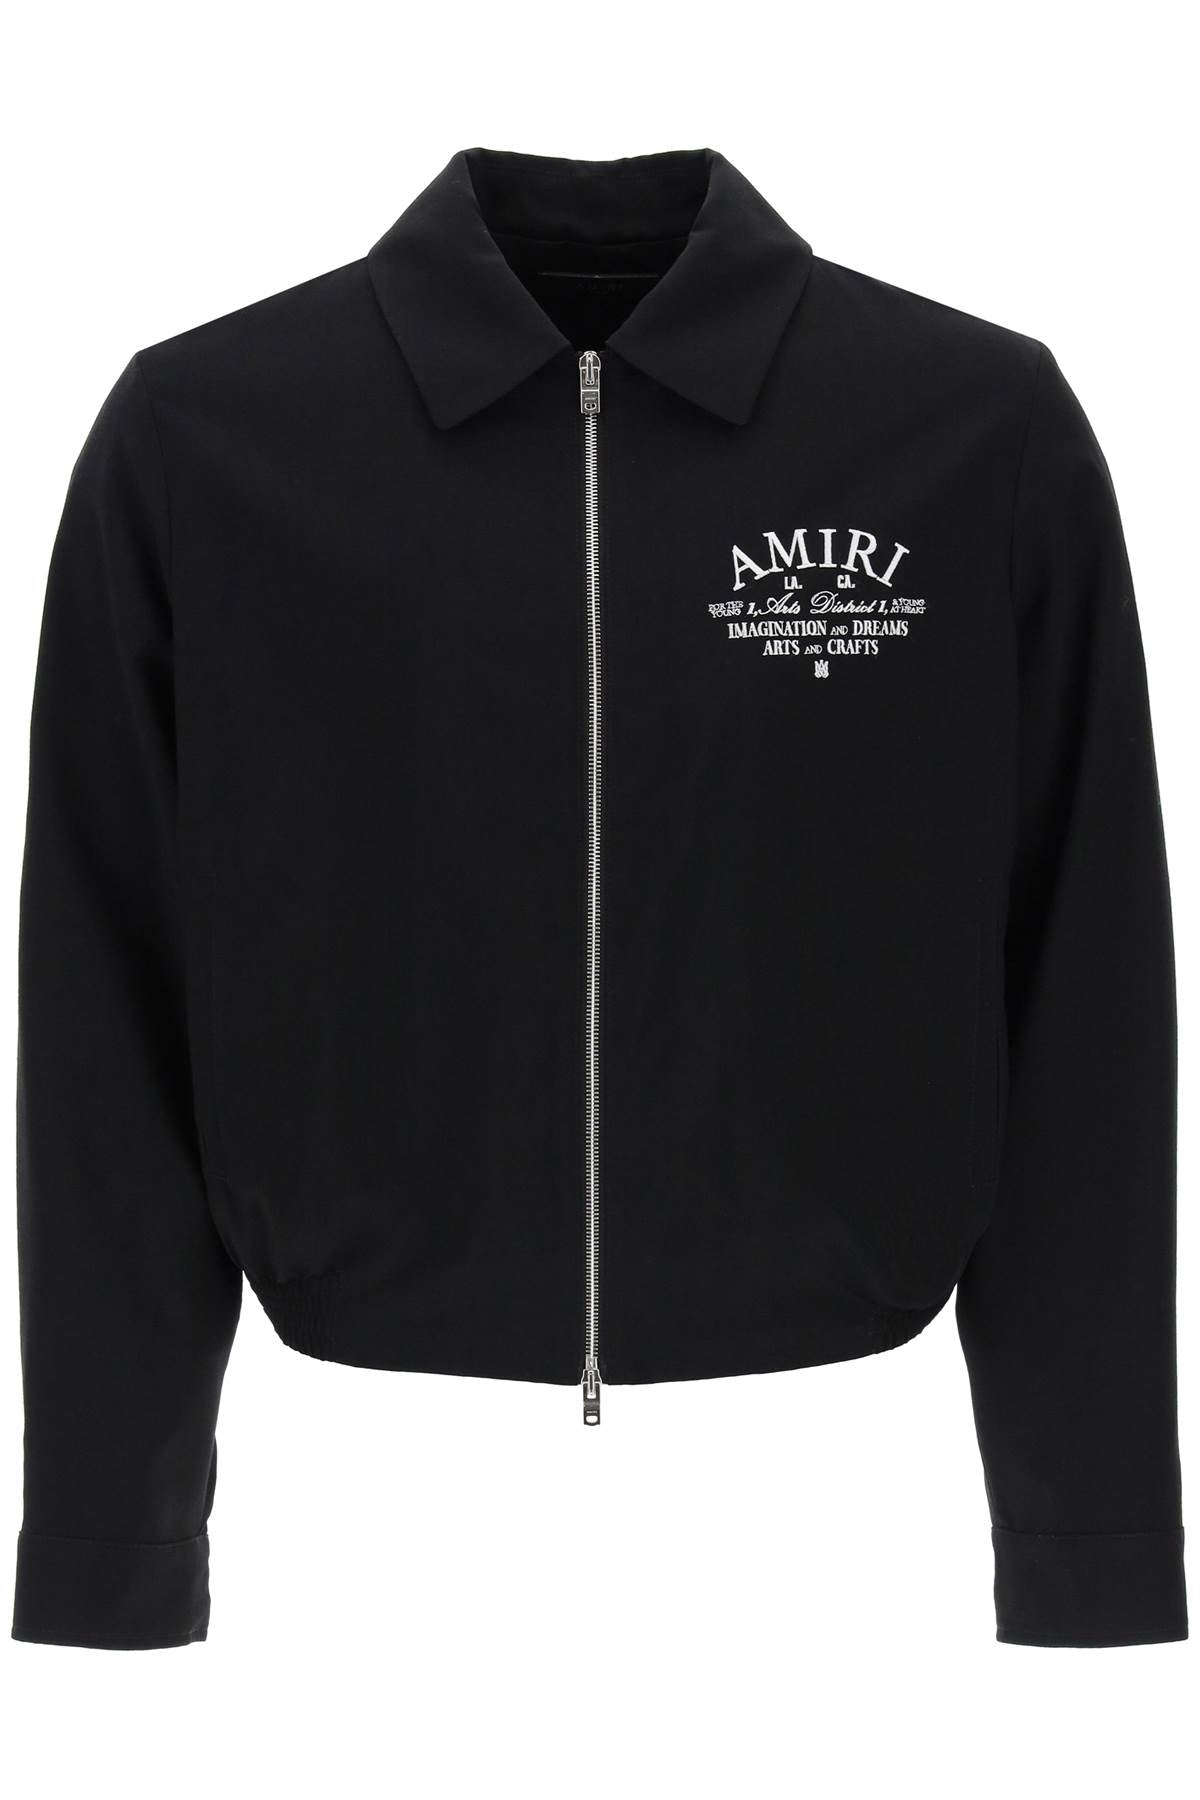 Amiri blouson jacket with arts district embroidery-0